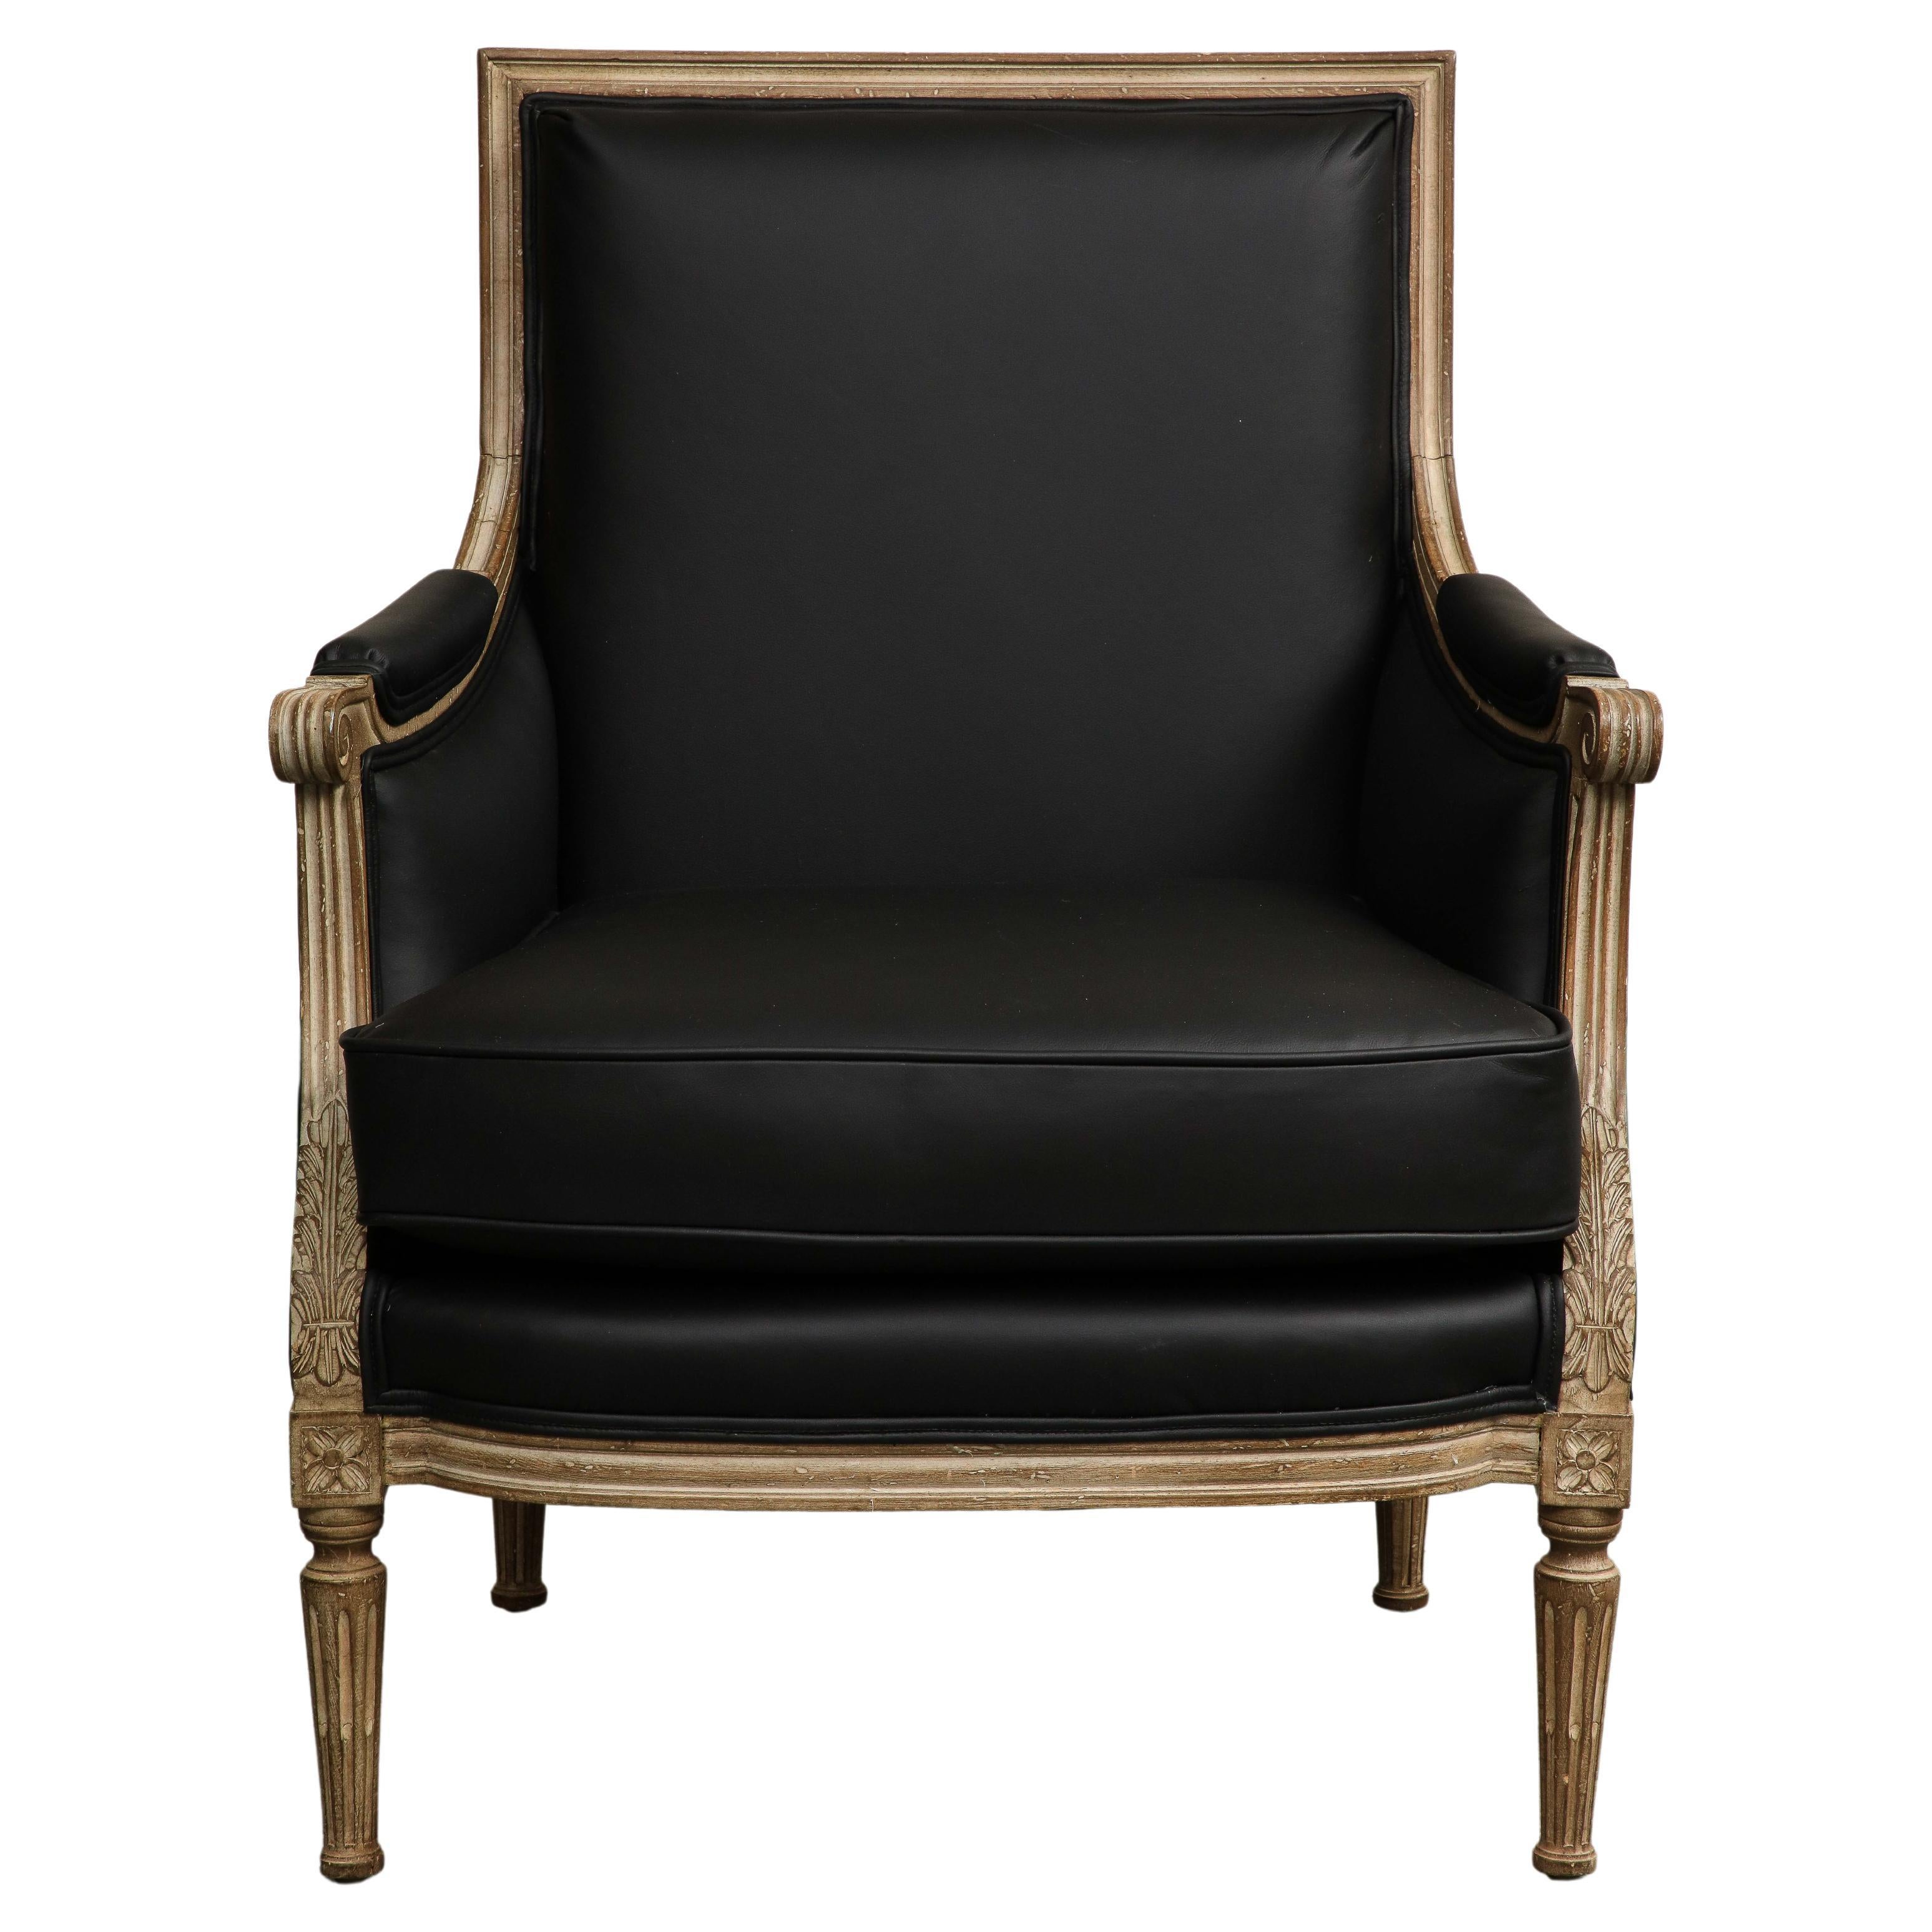 19th Century French Louis XVI Style carved and painted wood Bergère armchair. Black leather upholstery newly redone in 2022, including seat, back and arm rests. 

Dimensions: 
37